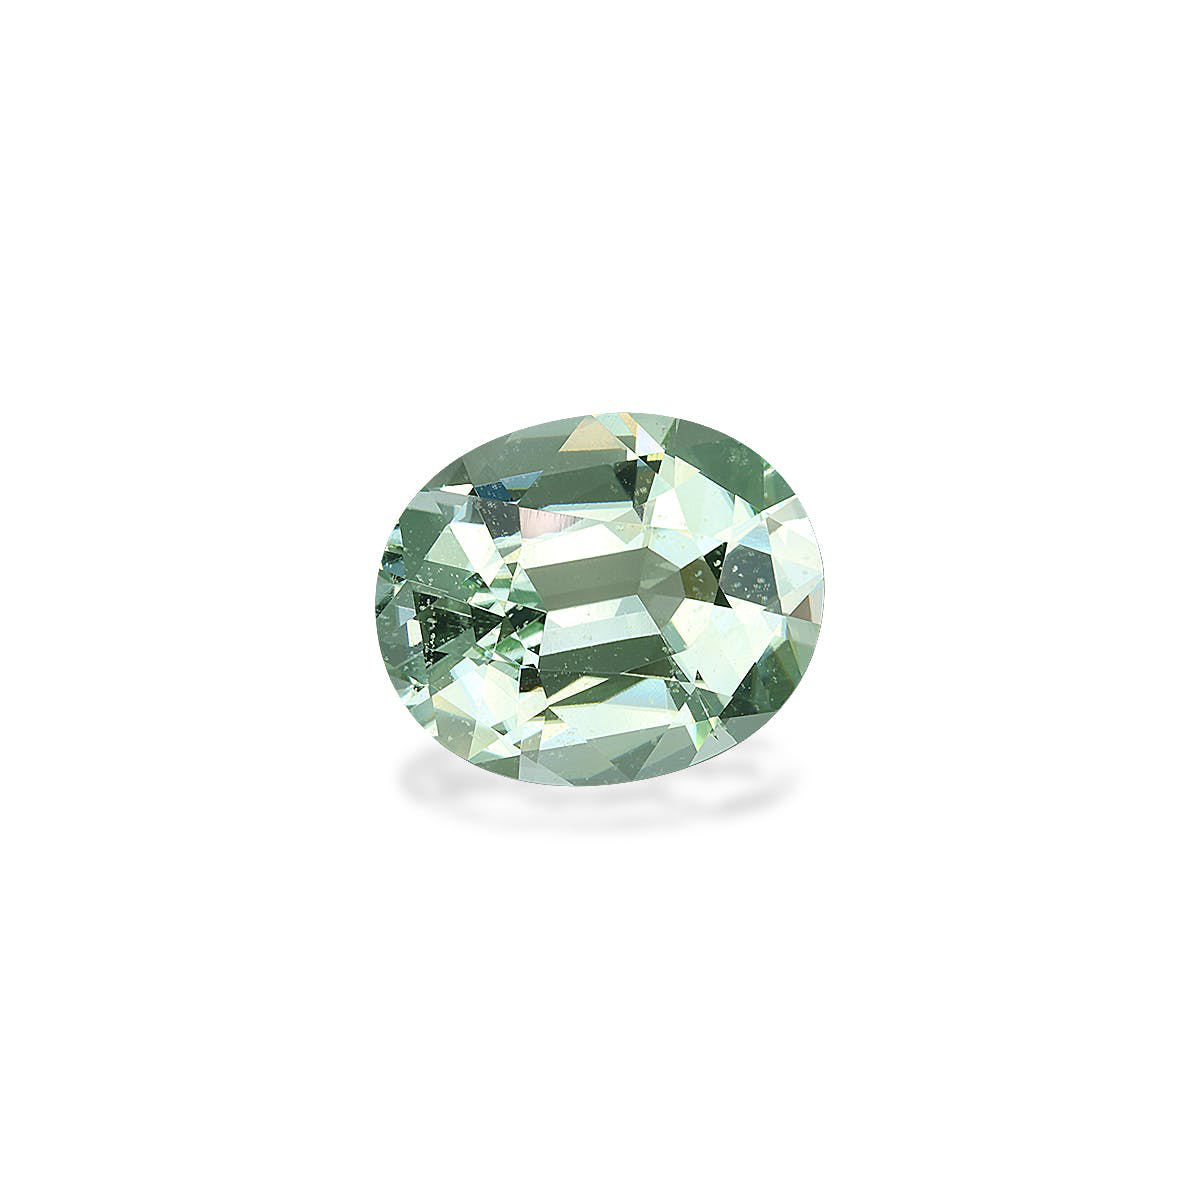 Picture of Mist Green Tourmaline 9.63ct (TG1529)